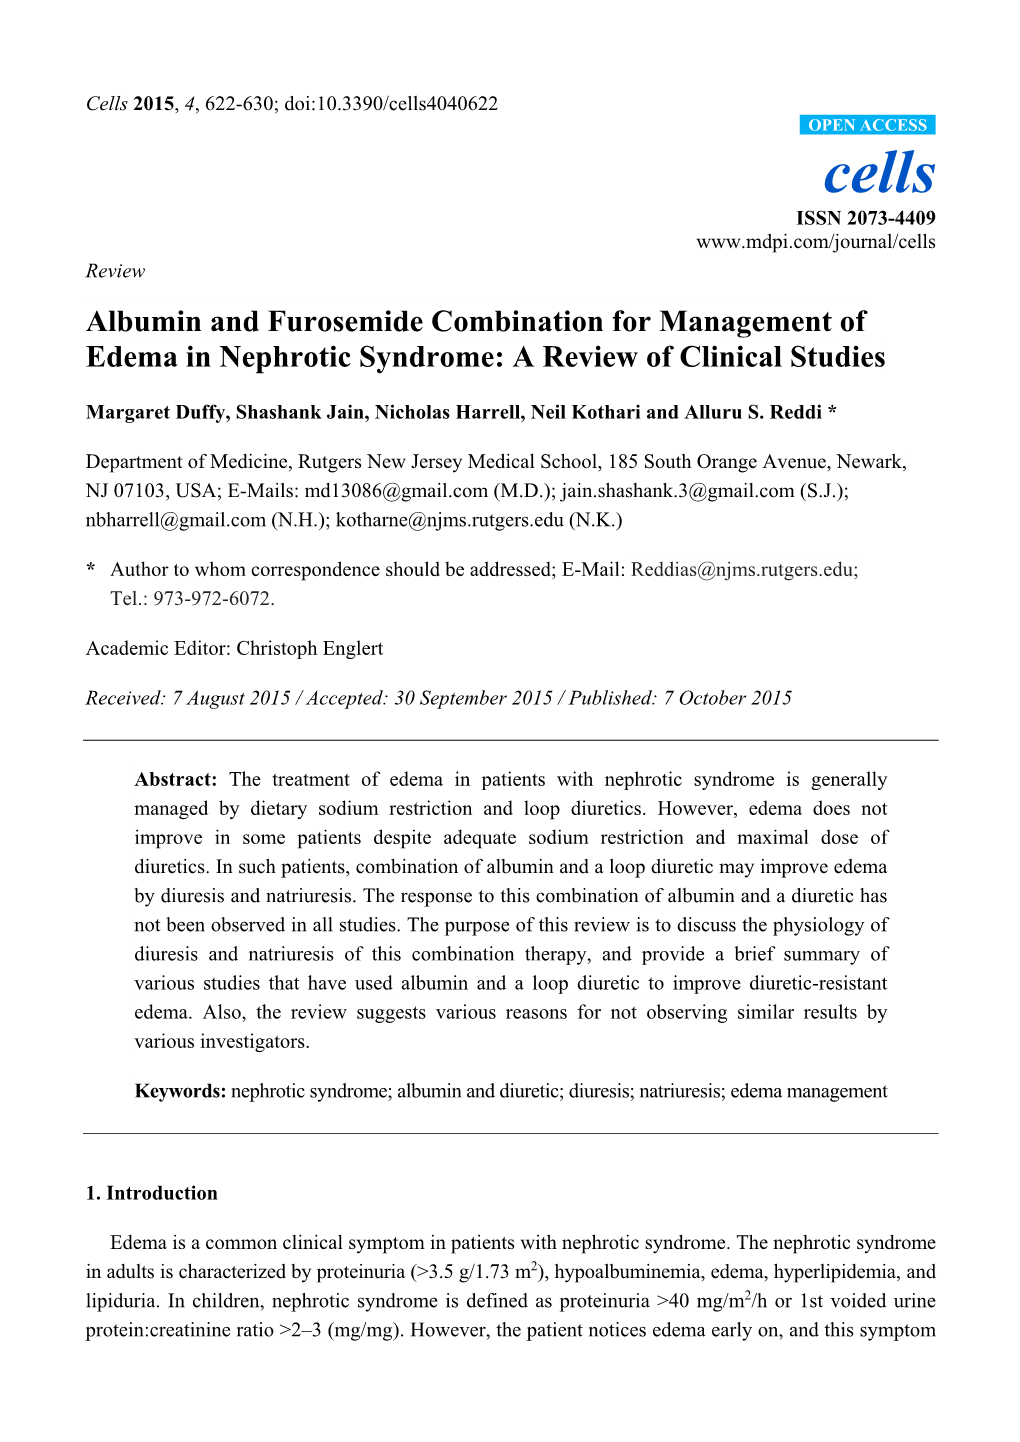 Albumin and Furosemide Combination for Management of Edema in Nephrotic Syndrome: a Review of Clinical Studies